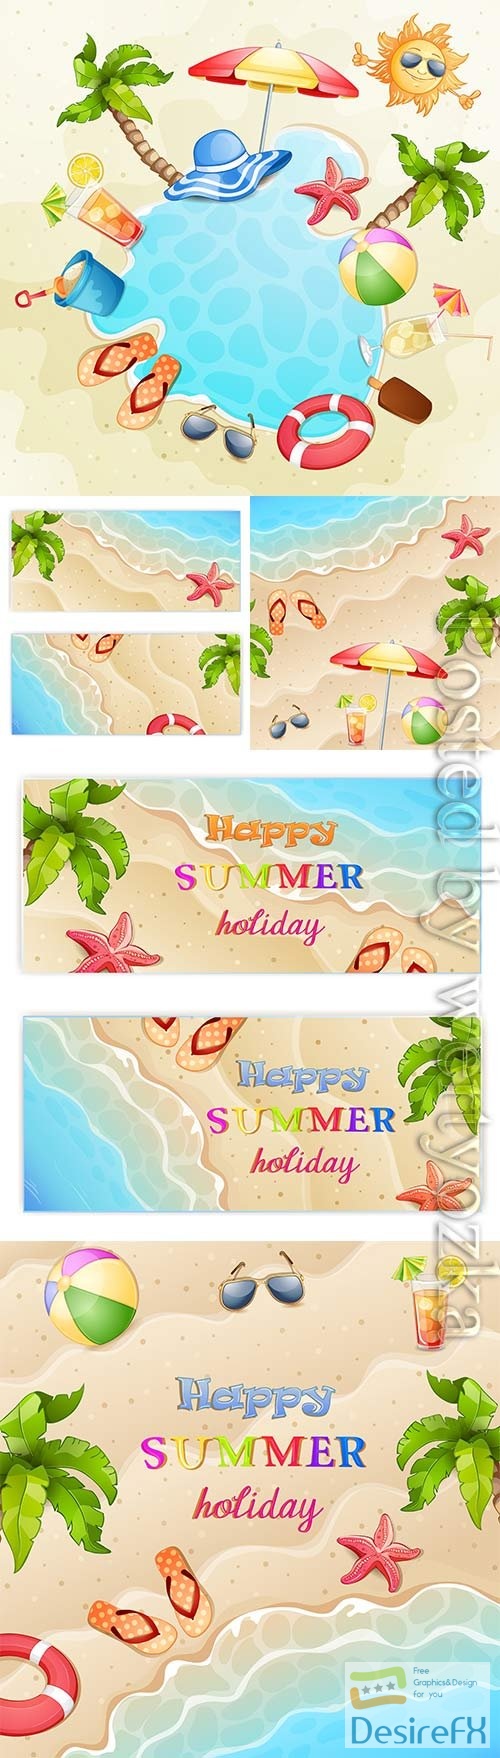 Summer vacation, sea, palm trees, cocktails in vector vol 4